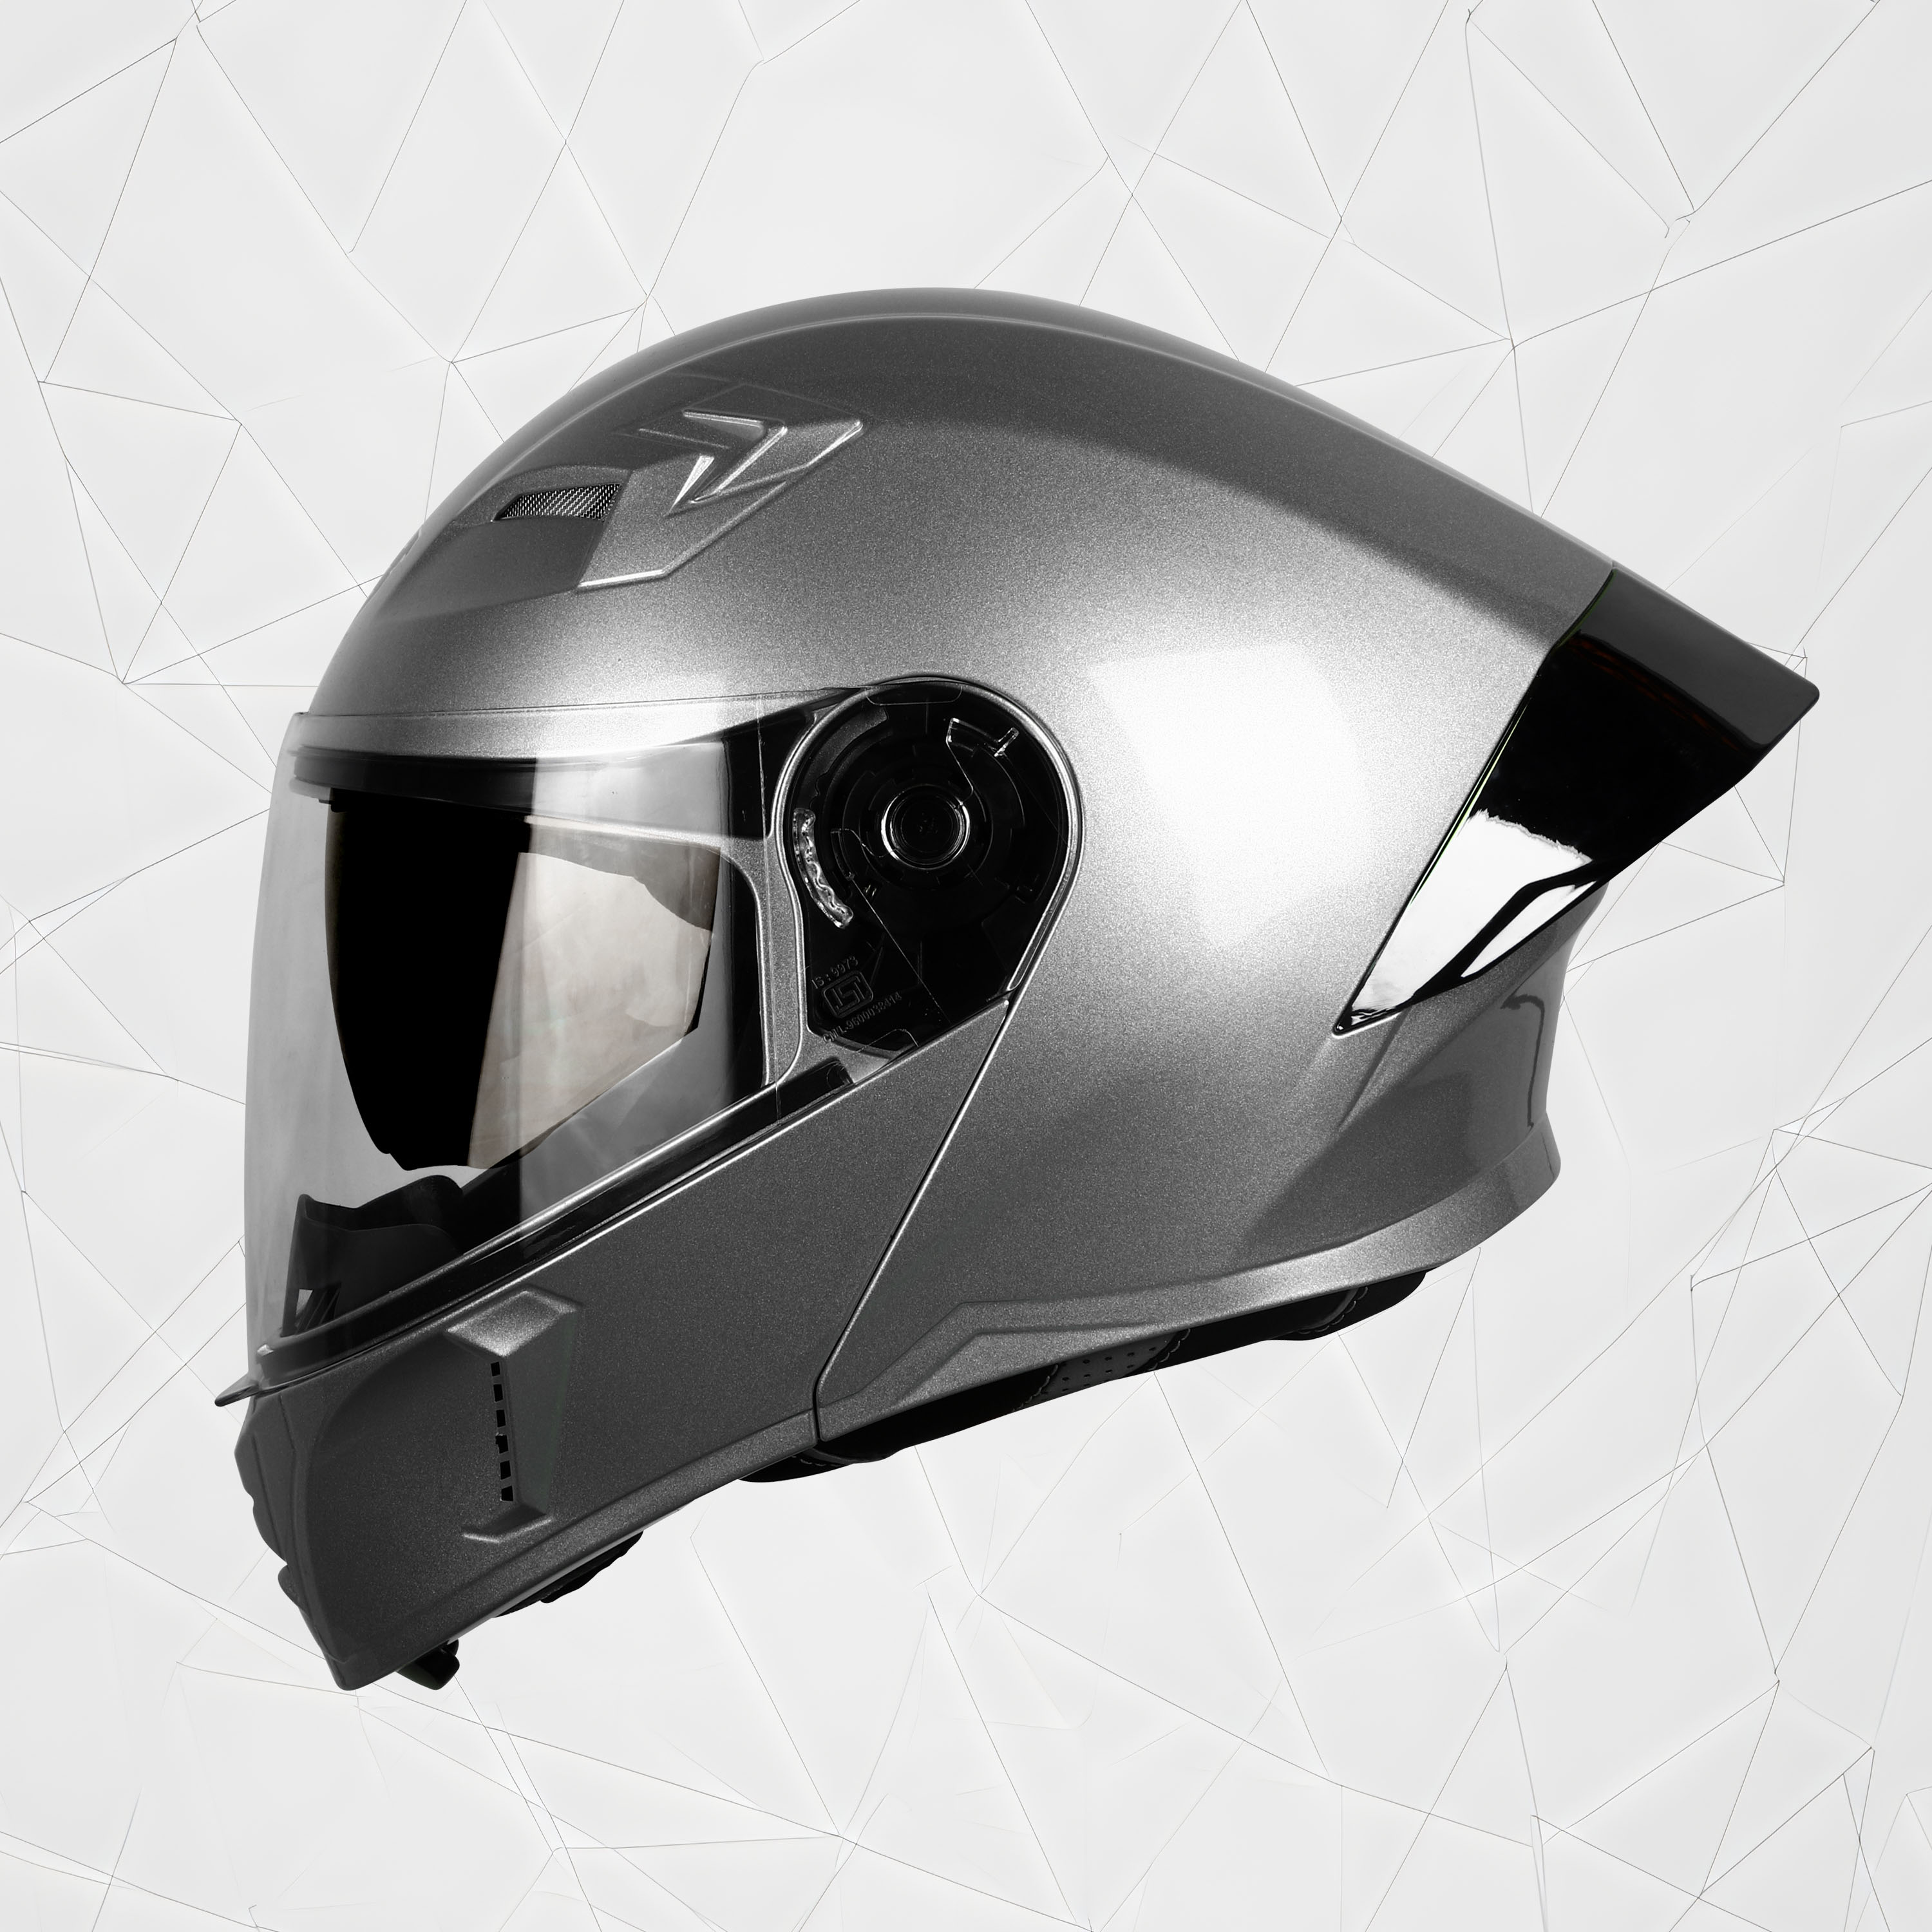 Steelbird SBA-20 7Wings ISI Certified Flip-Up Helmet With Black Spoiler For Men And Women With Inner Smoke Sun Shield (Glossy Silver)